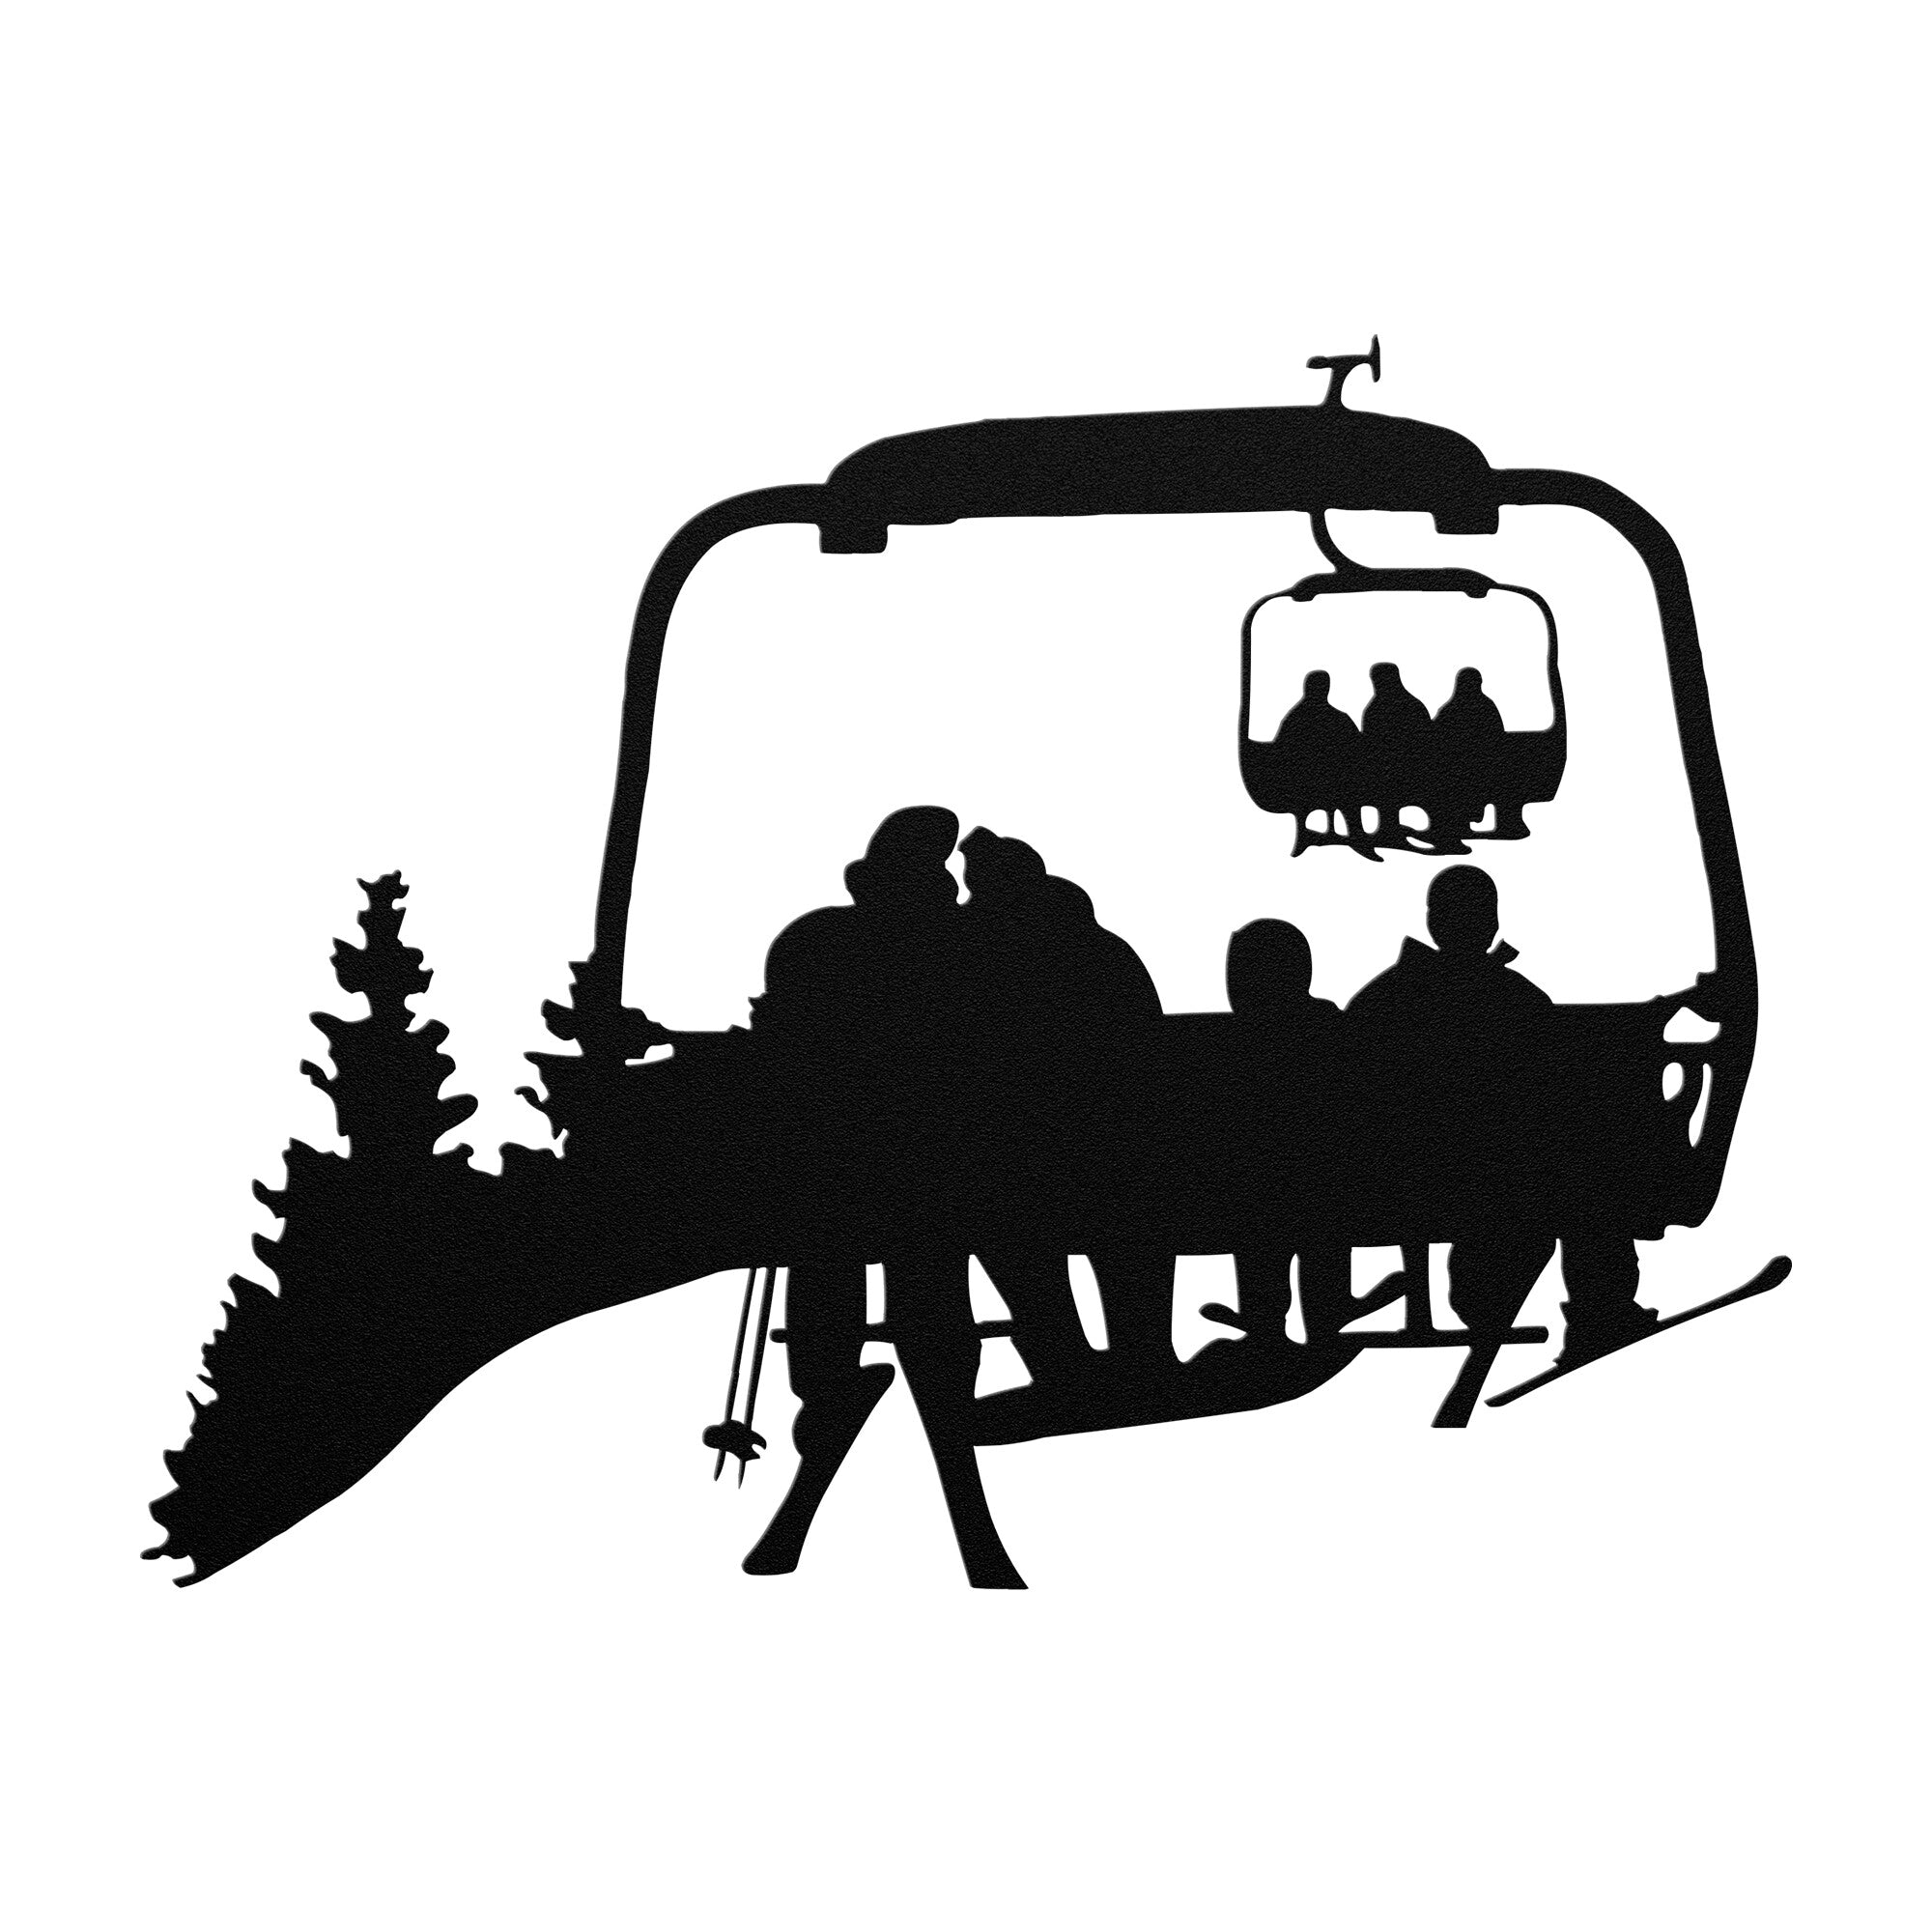 PERSONALIZED CHAIRLIFT SKI & SNOWBOARD FAMILY METAL WALL ART, 1 SKIING DAD, 1 SNOWBOARDING MOM, 2 SKIING CHILDREN  (🇺🇸 MADE IN THE USA)